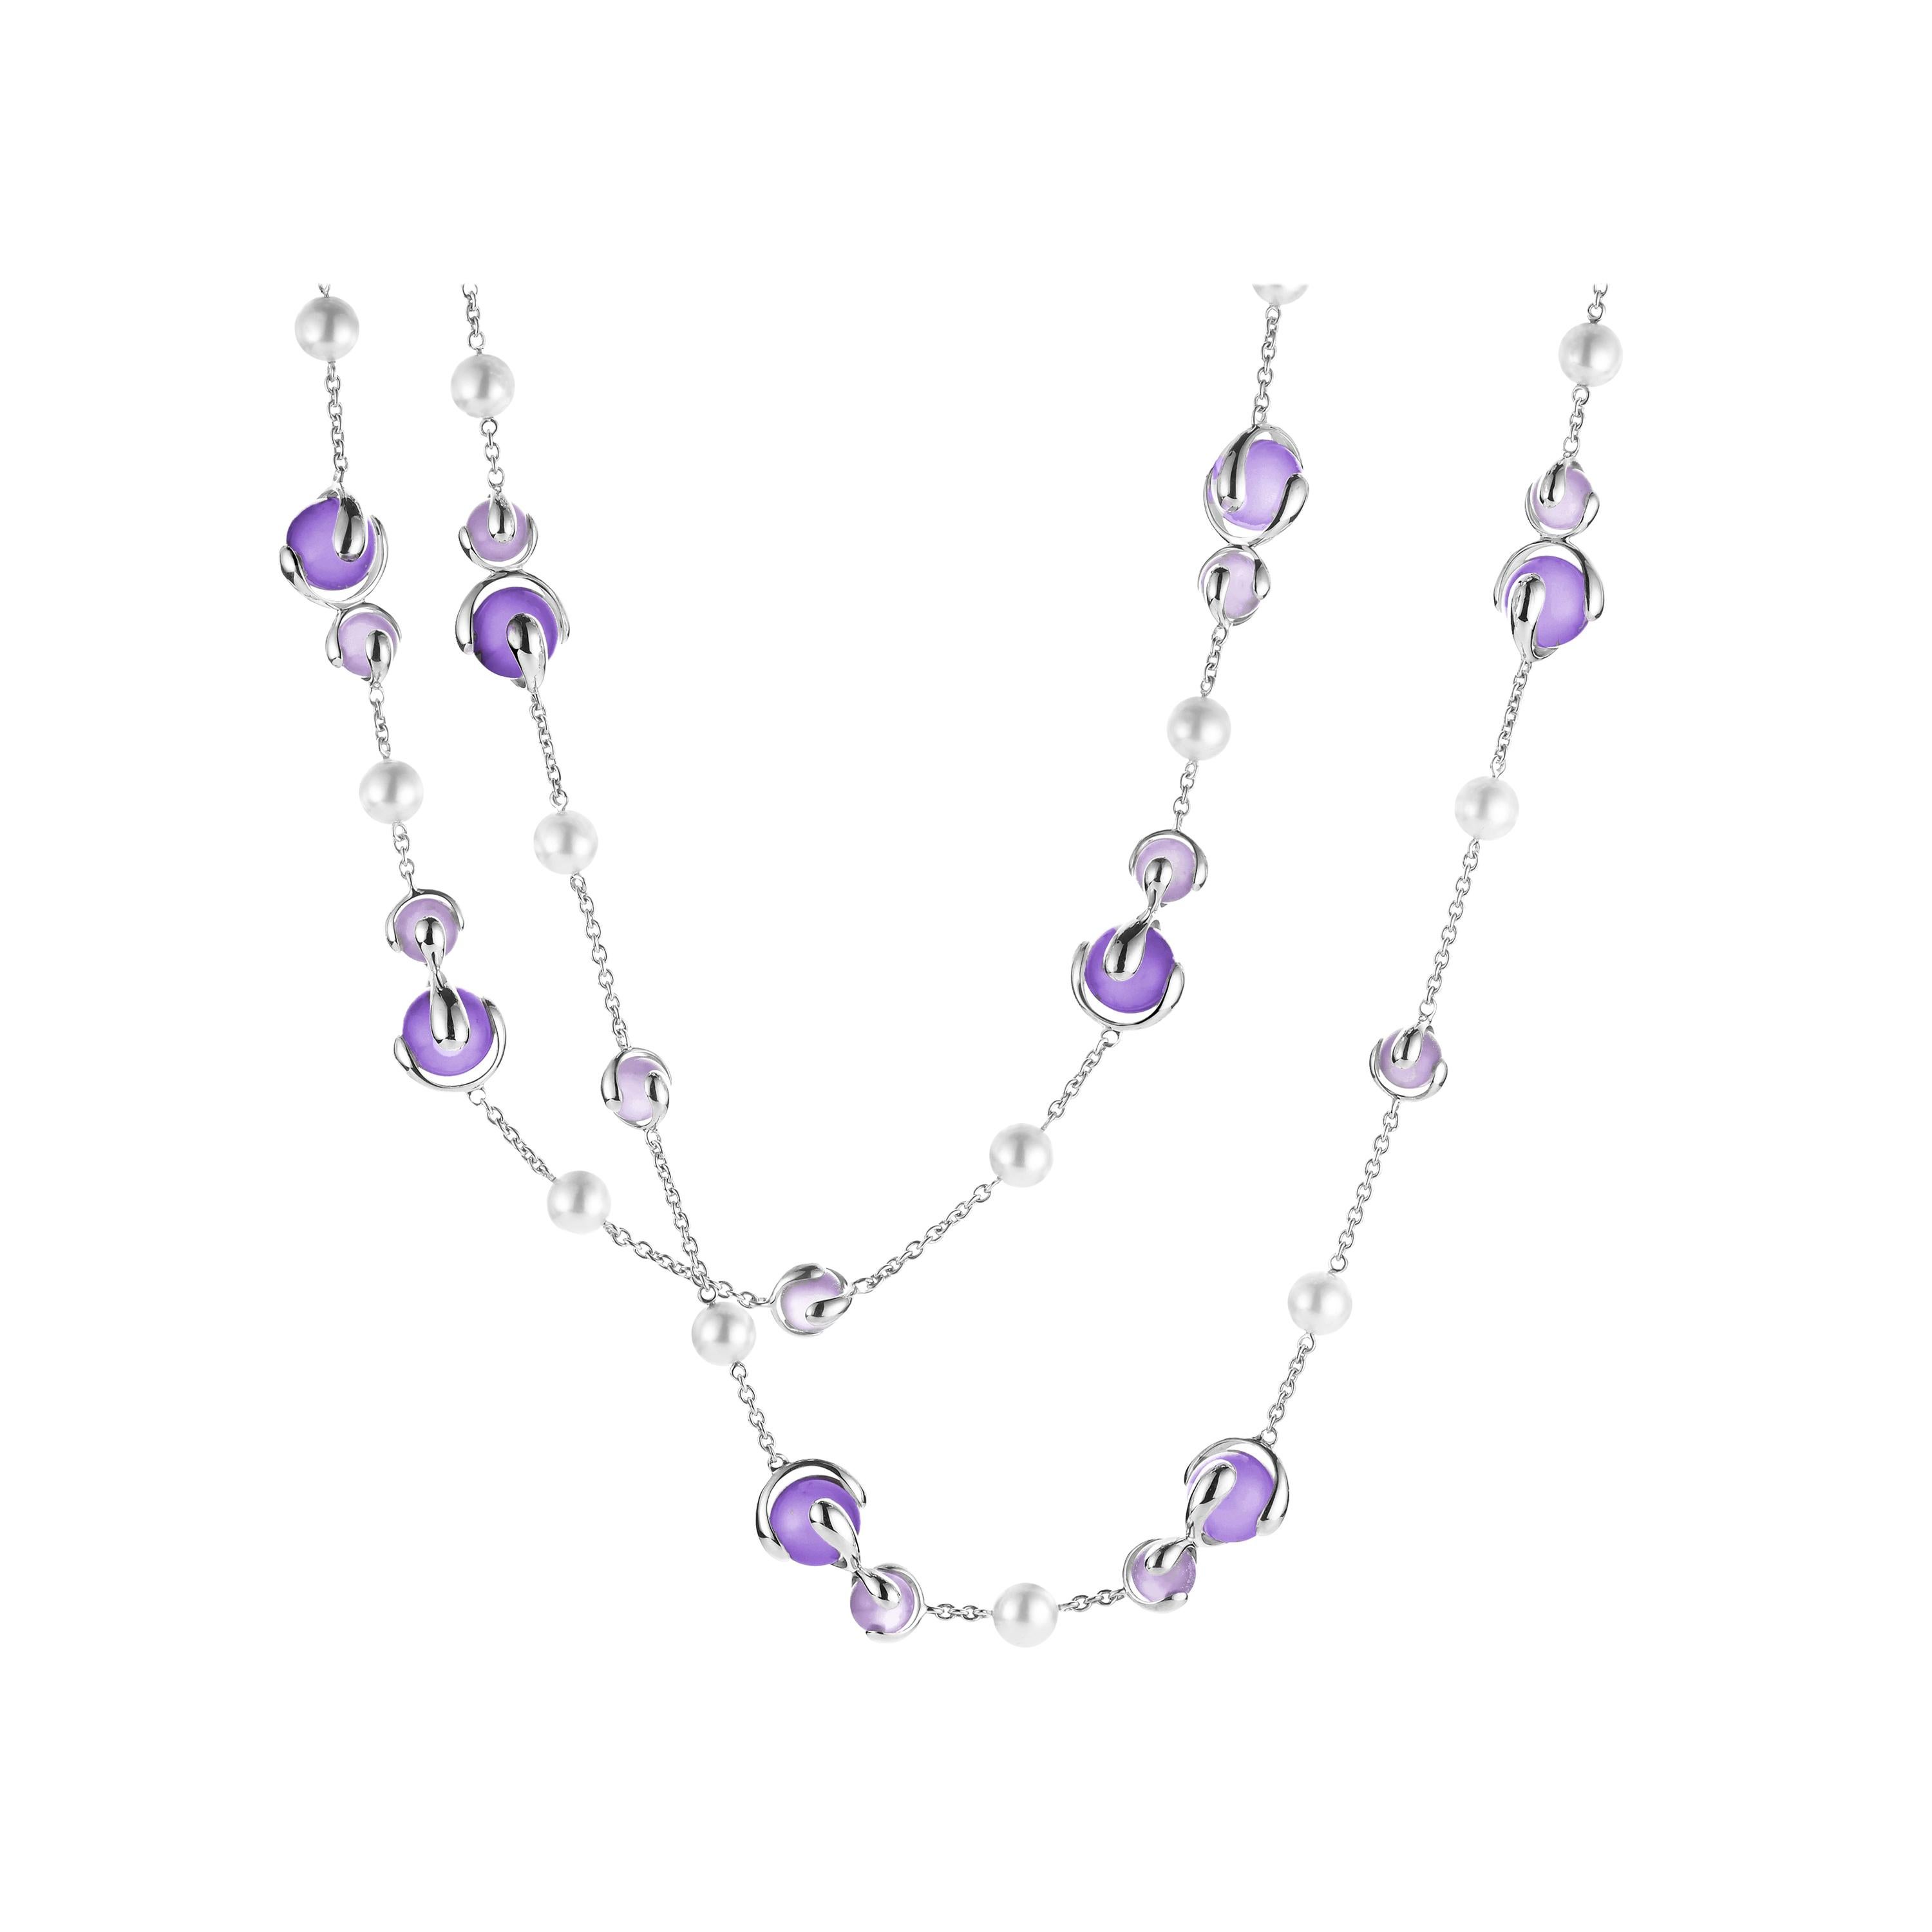 Marina B Amethyst Bead and Pearl Cardan Necklace For Sale